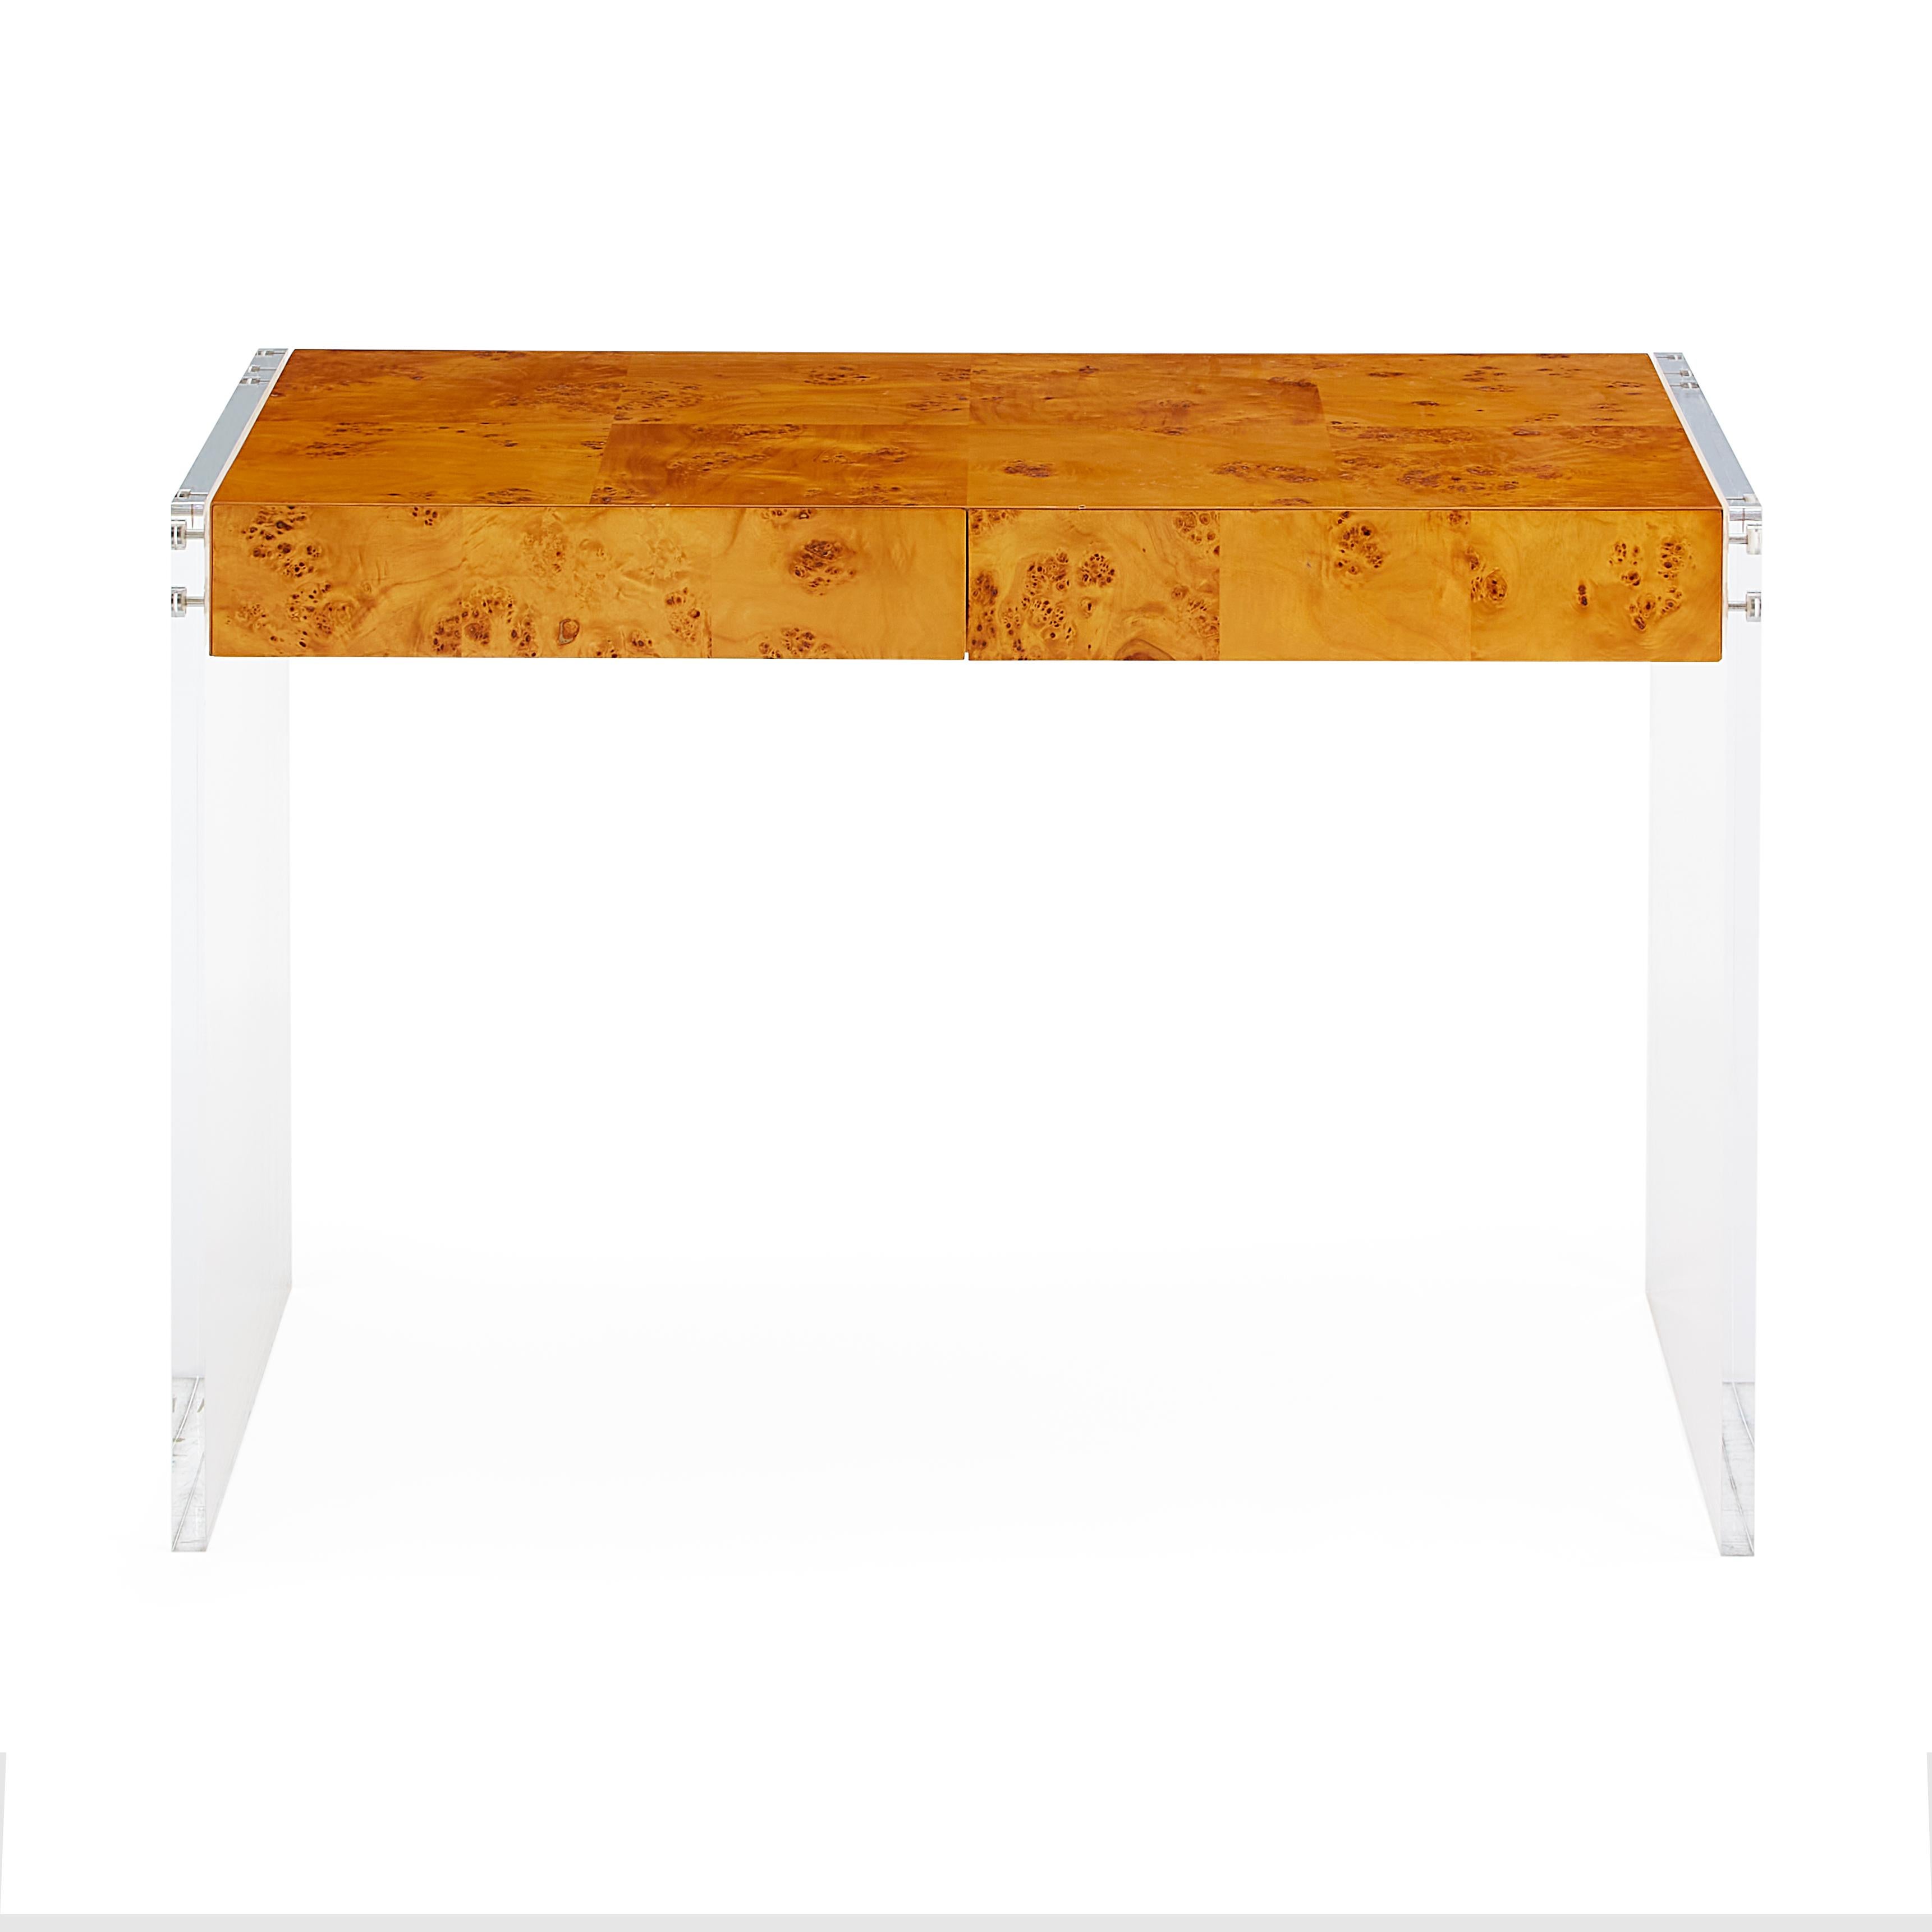 Timelessly chic. A Minimalist world of burled wood, acrylic panels, and stainless steel. Pieced, burled mappa wood floats between Lucite legs with stainless steel accents. Fully finished drawers with a hidden pull make this desk fierce from any